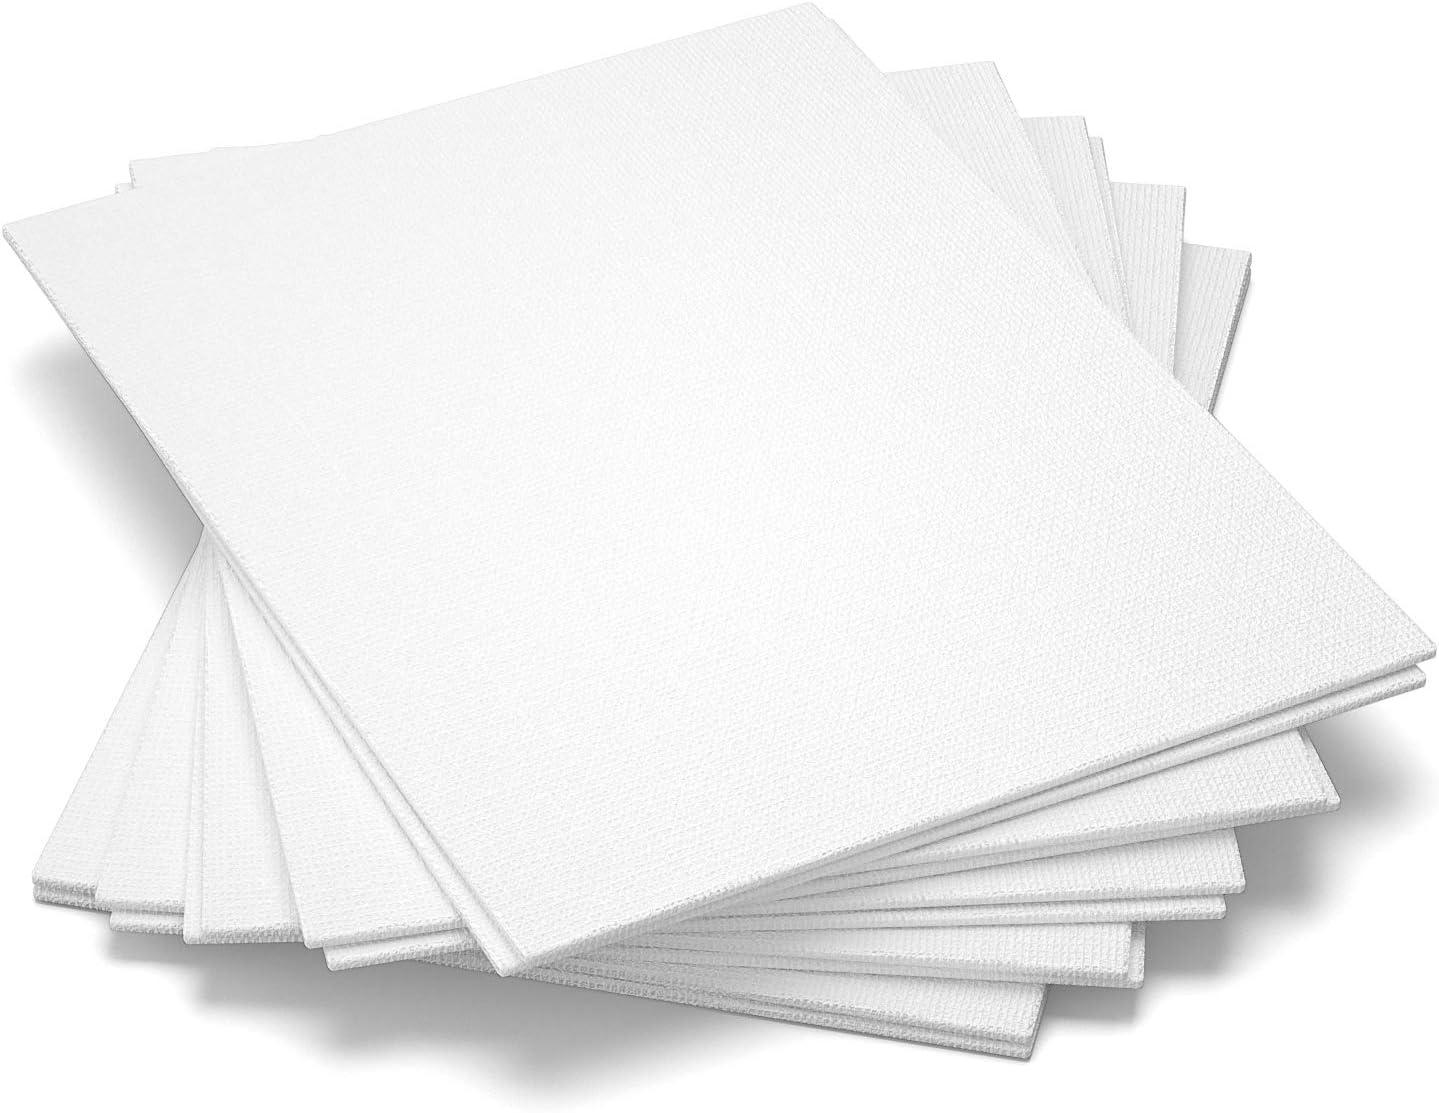 GOTIDEAL Stretched Canvas, Multi Pack 4x4, 5x7, 8x10,9x12, 11x14 Set  of 10, Primed White - 100% Cotton Artist Canvas Boards for Painting,  Acrylic